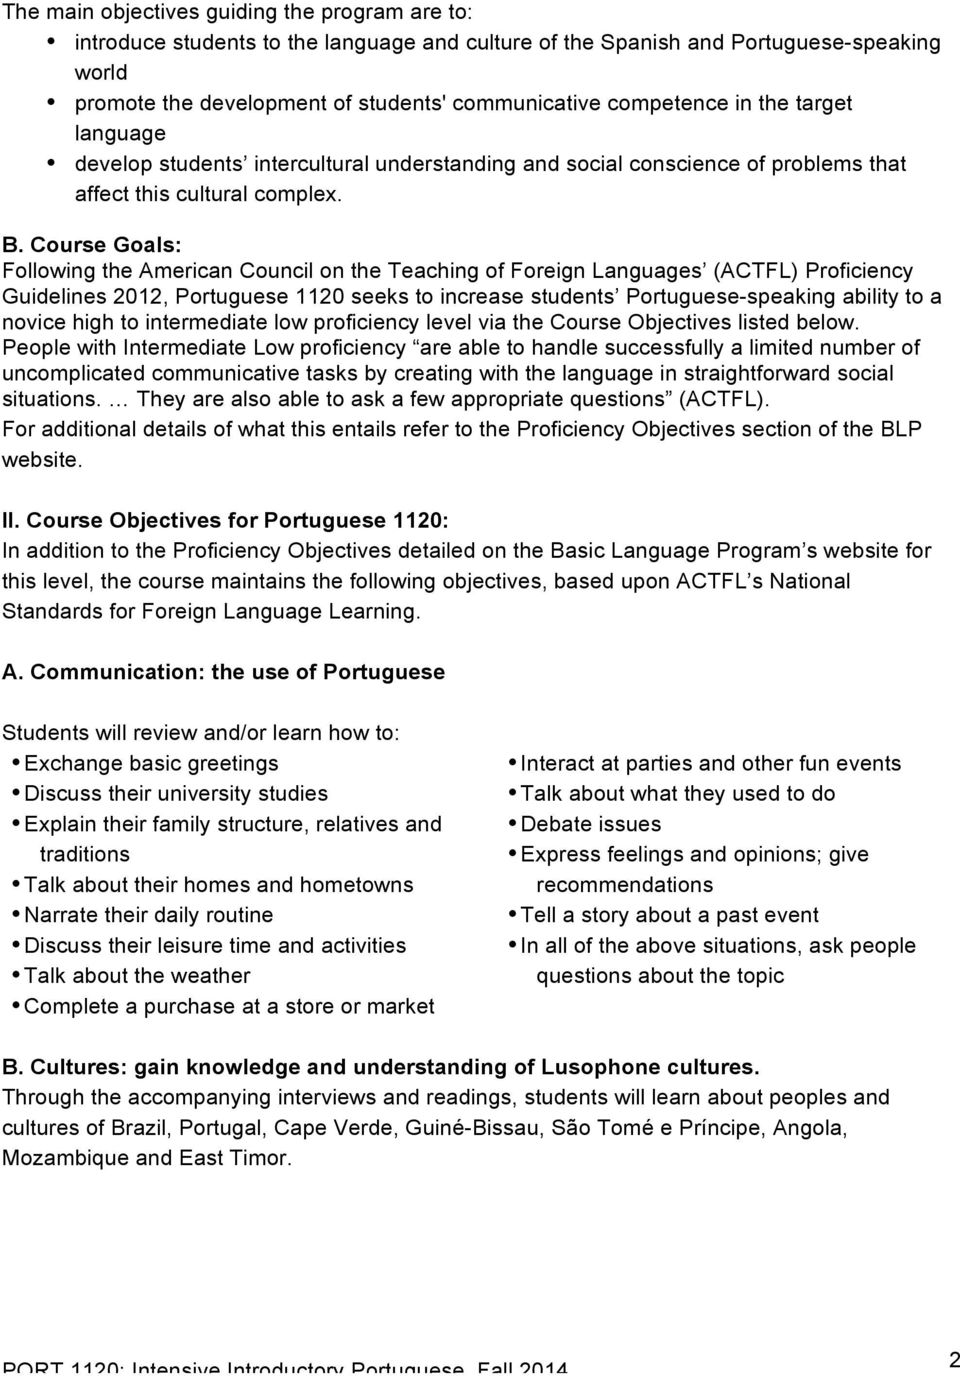 Course Goals: Following the American Council on the Teaching of Foreign Languages (ACTFL) Proficiency Guidelines 2012, Portuguese 1120 seeks to increase students Portuguese-speaking ability to a